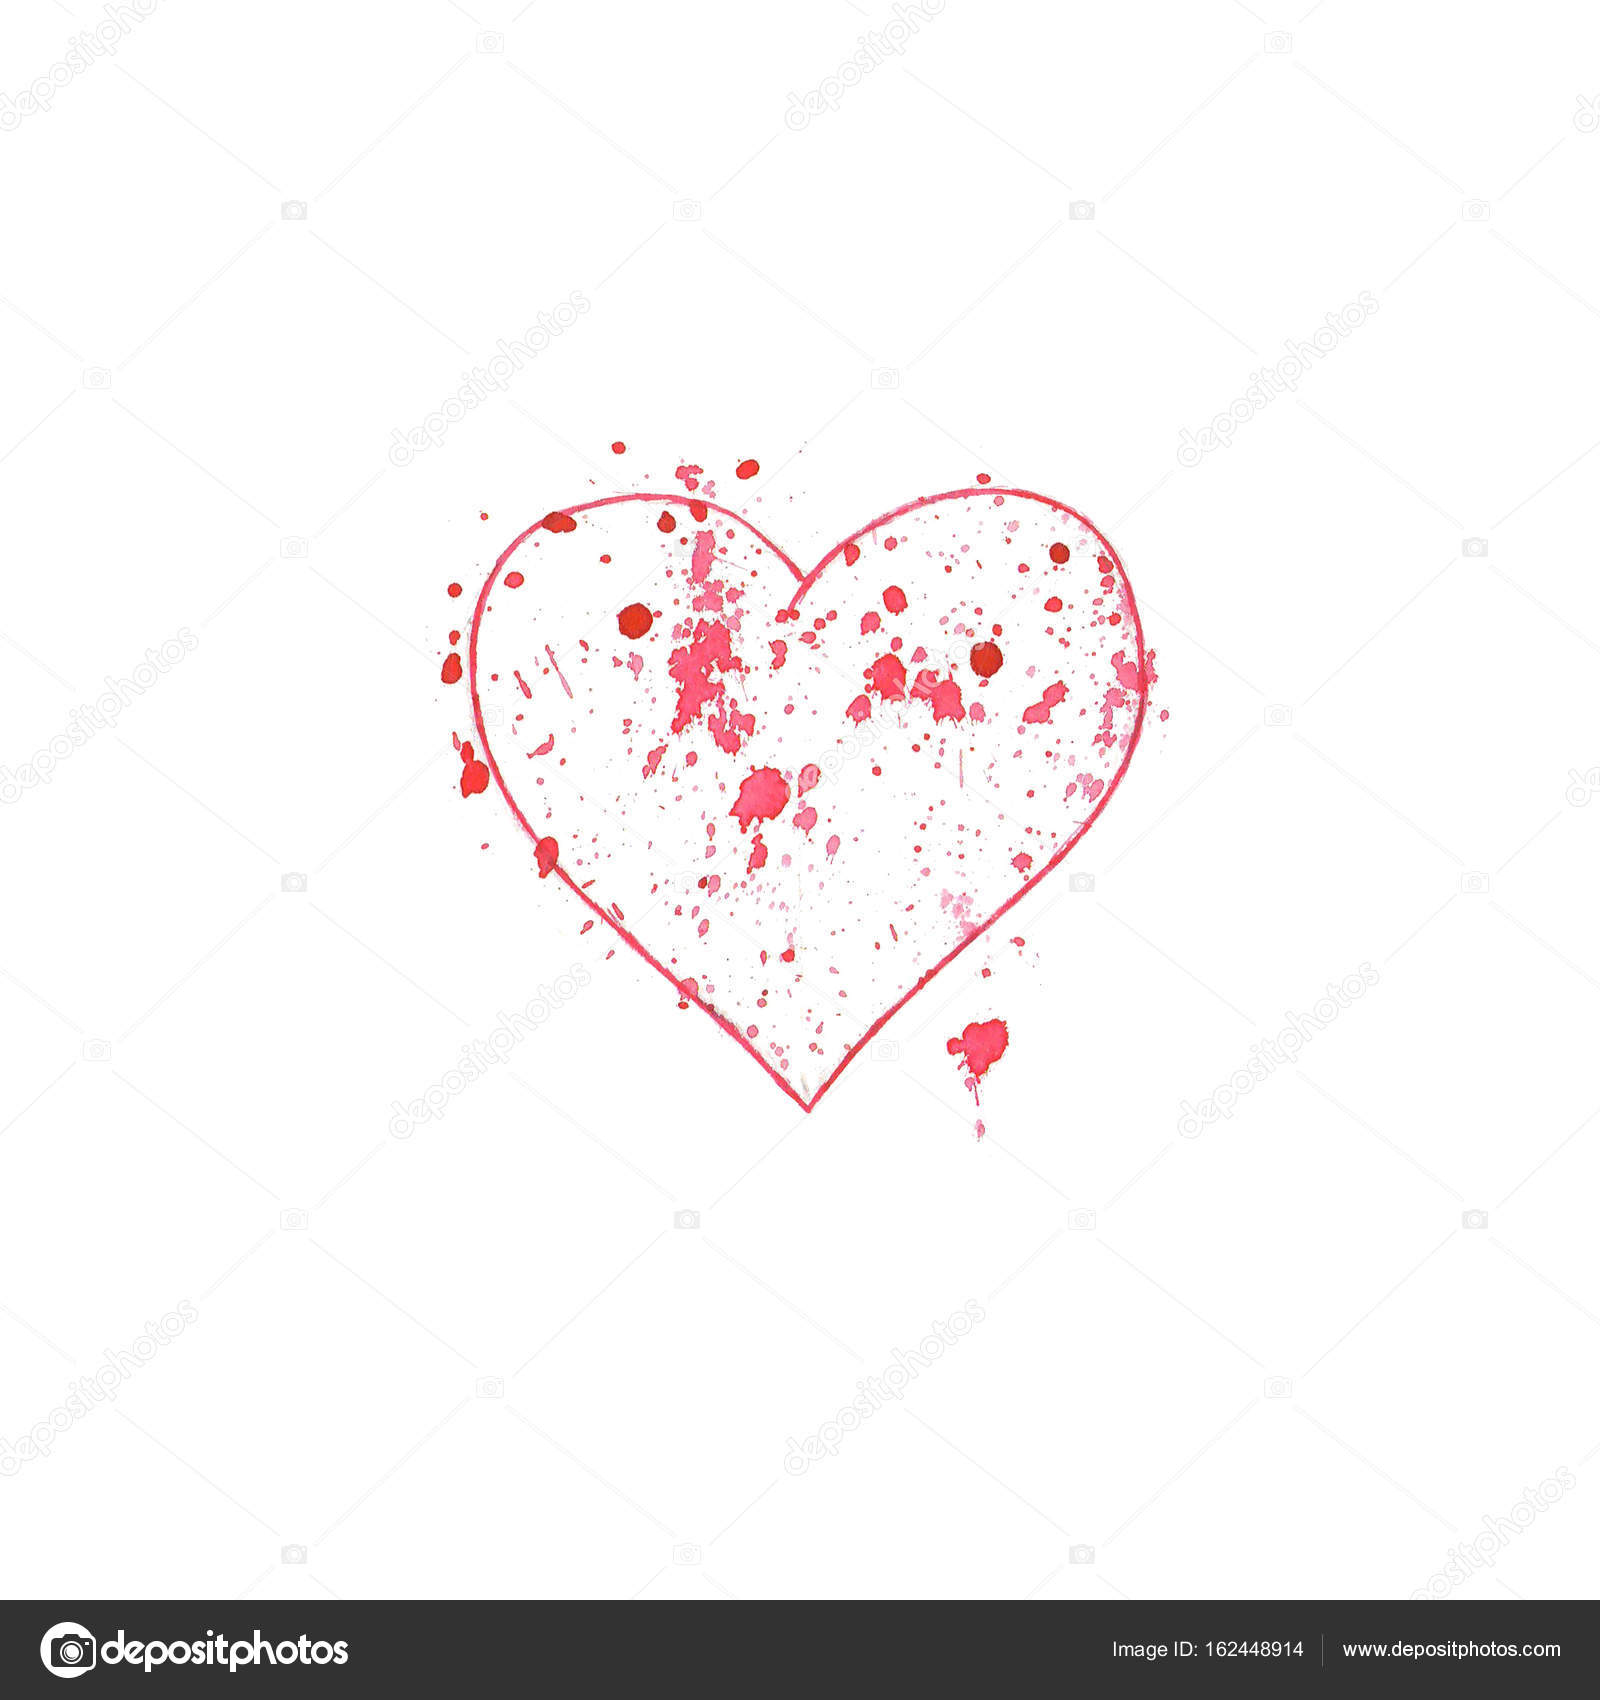 Watercolor heart with stains. Sketch style — Stock Photo © OlgaZe ...